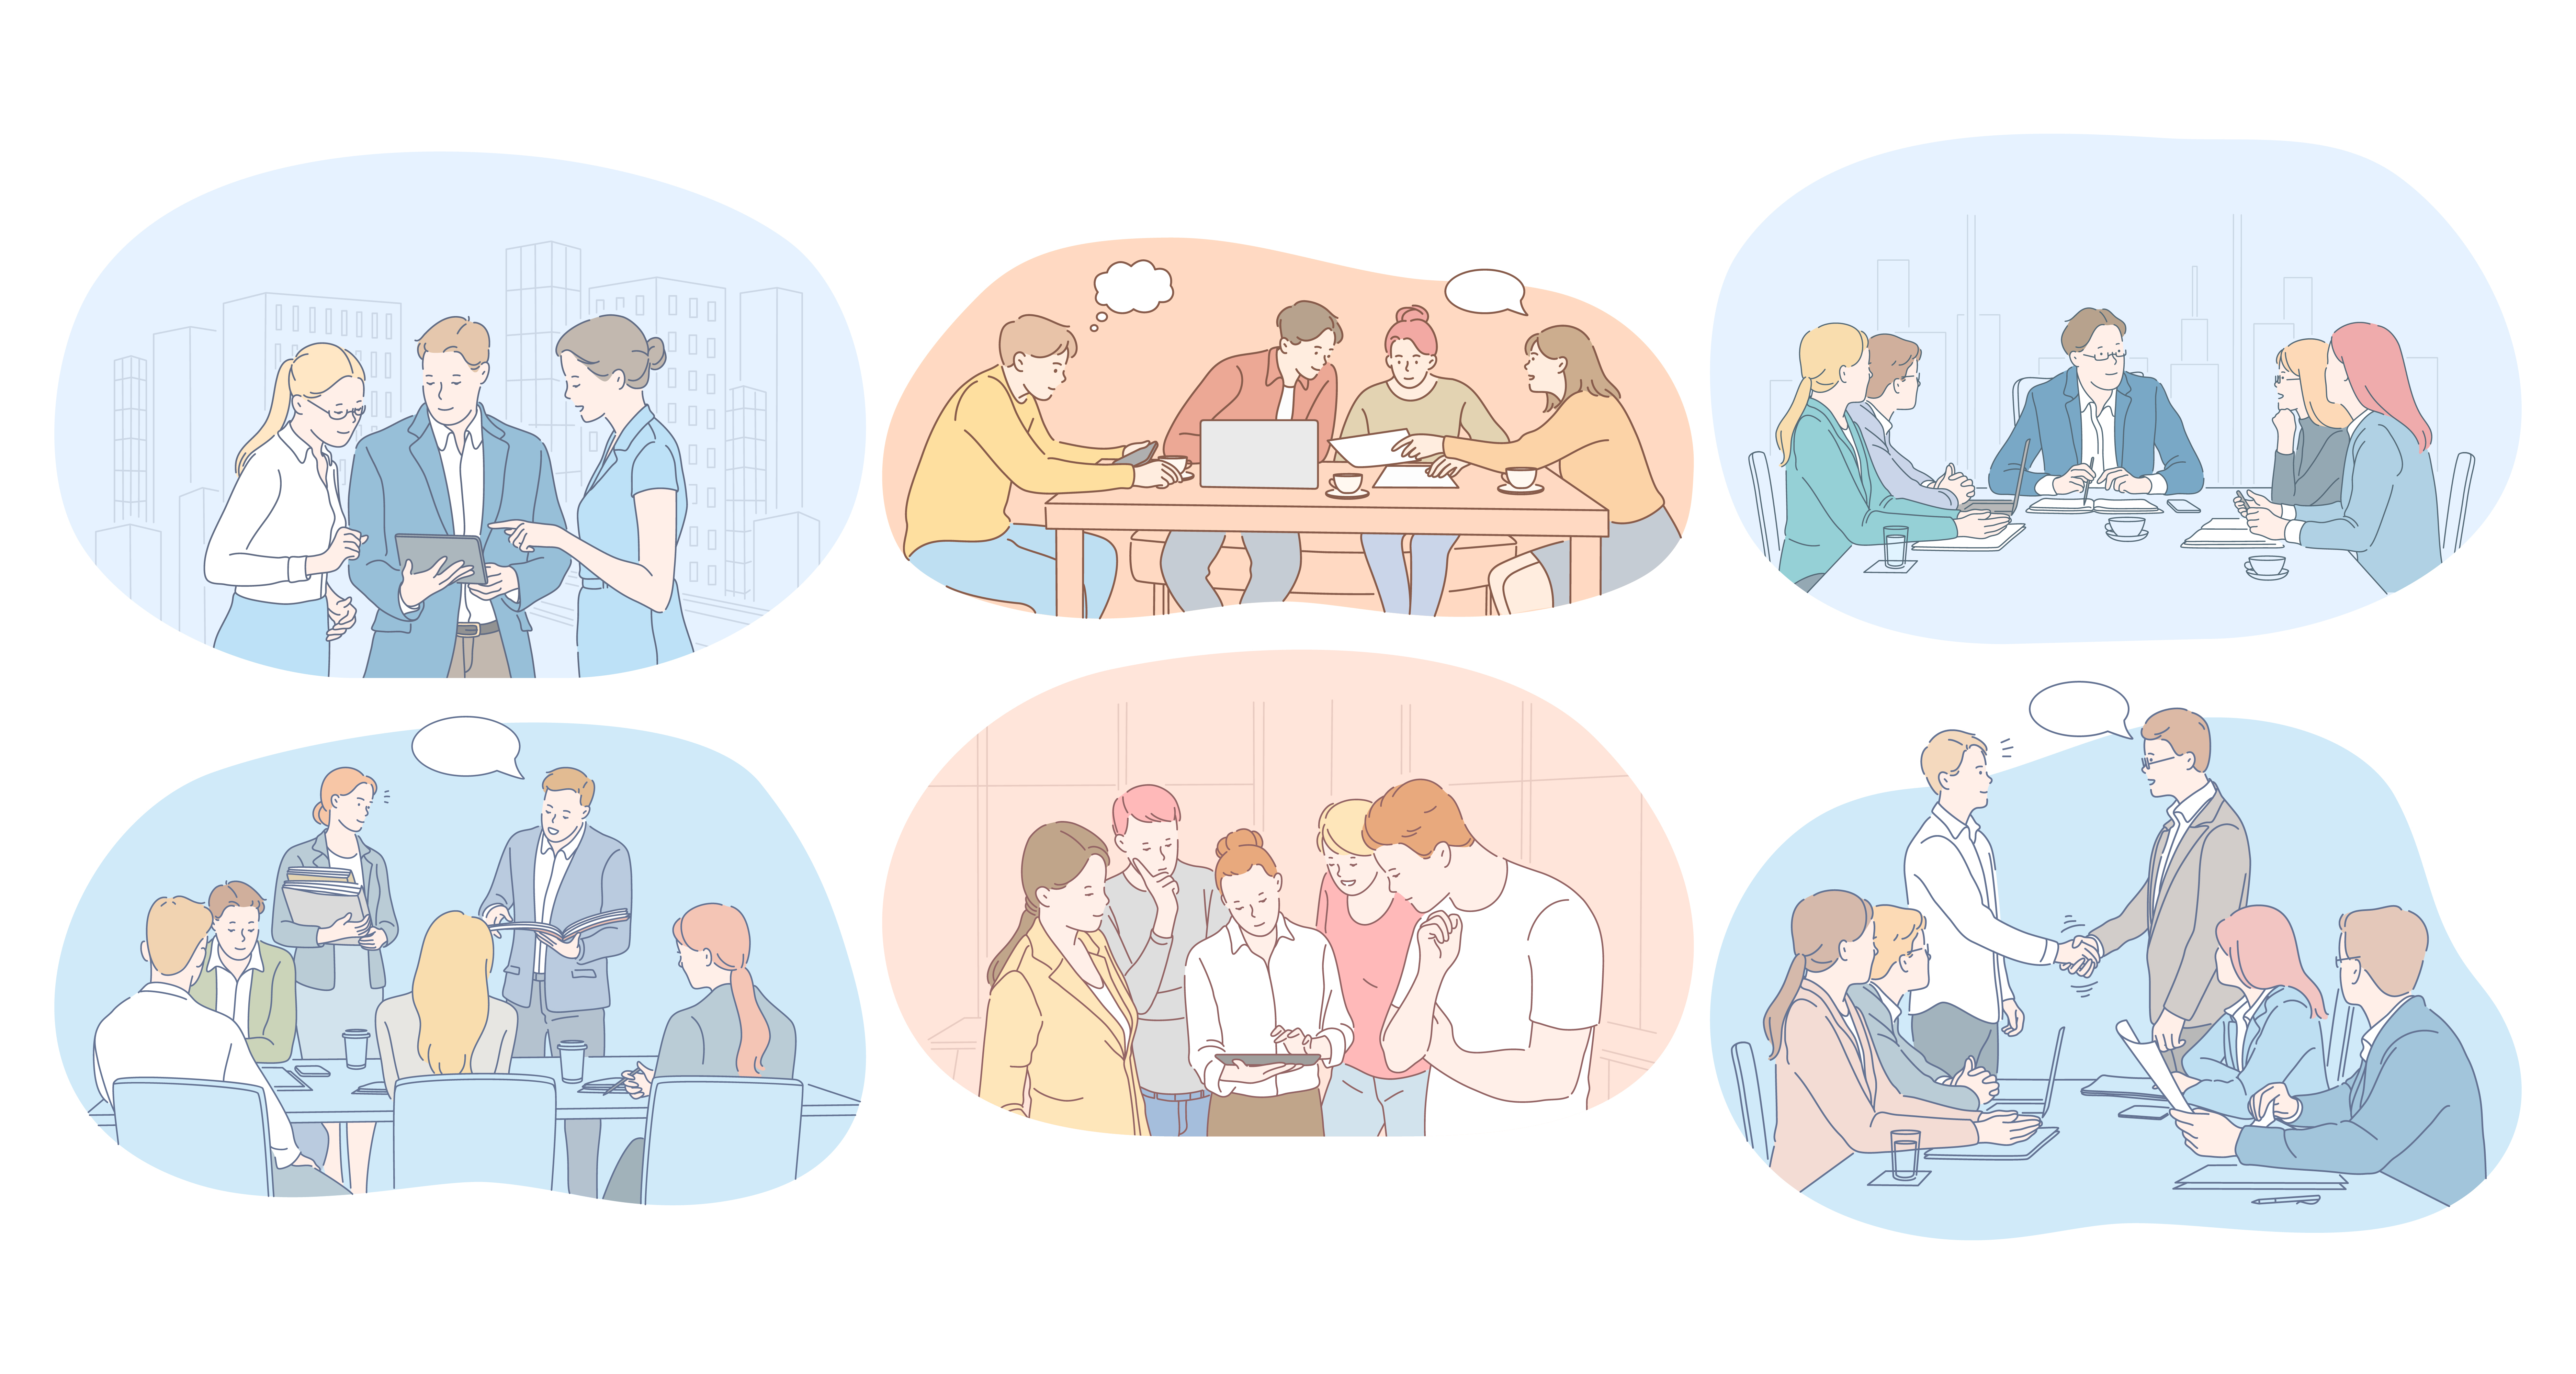 Teamwork, brainstorming, negotiations, meeting, business partners concept. Business people office workers discussing projects and startups together, having brainstorming, making agreement . Teamwork, brainstorming, negotiations, meeting, business partners concept